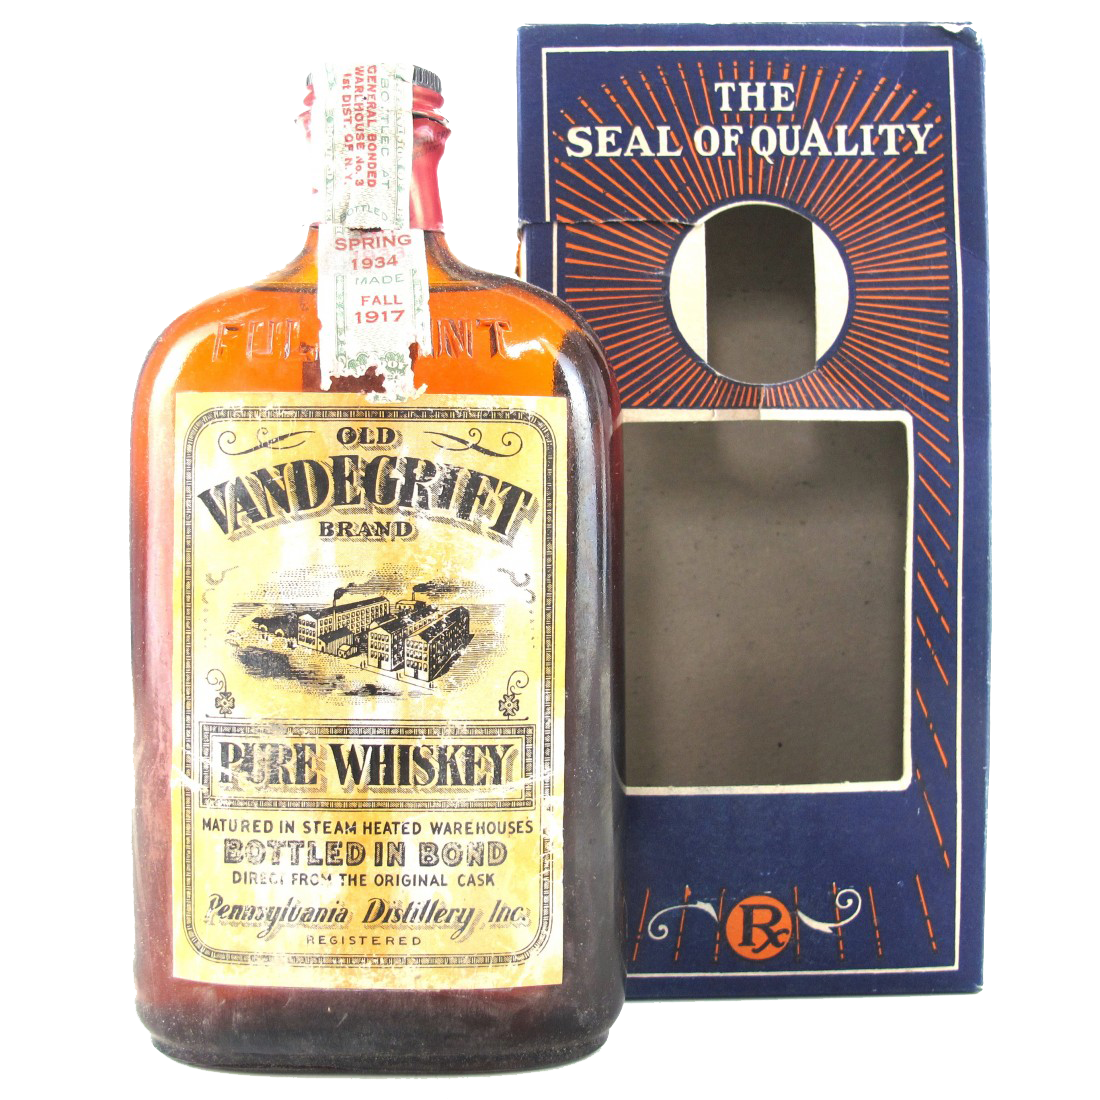 The Legacy of the Vandegrift Distilling Company